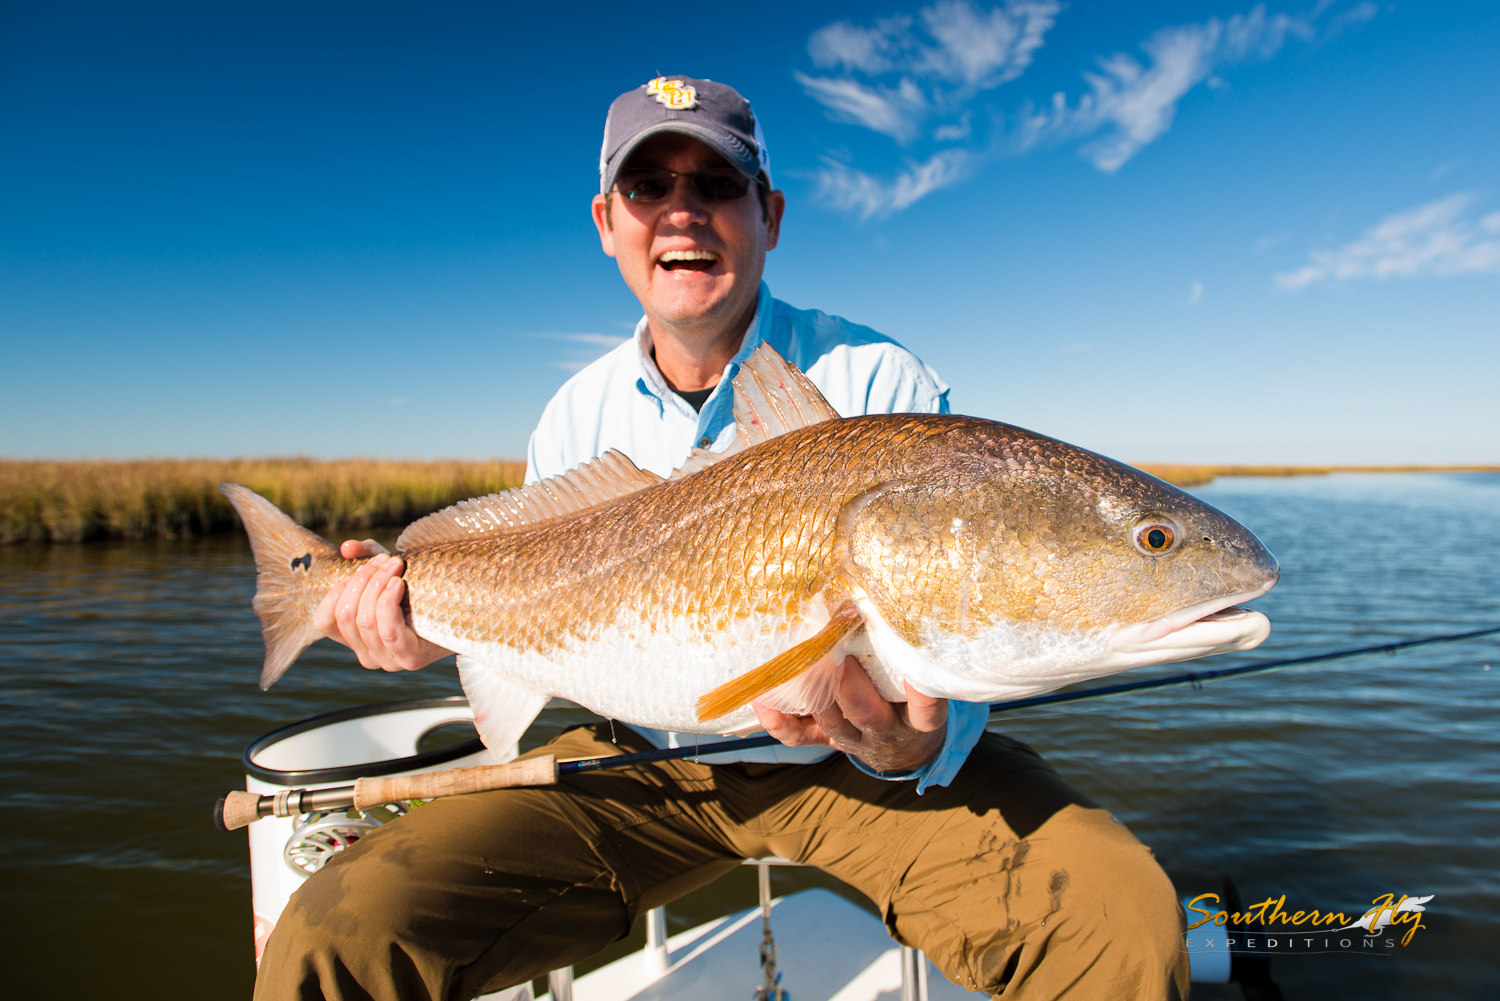 Fly Fishing new orleans la with Southern Fly Expeditions fishing charter guide 